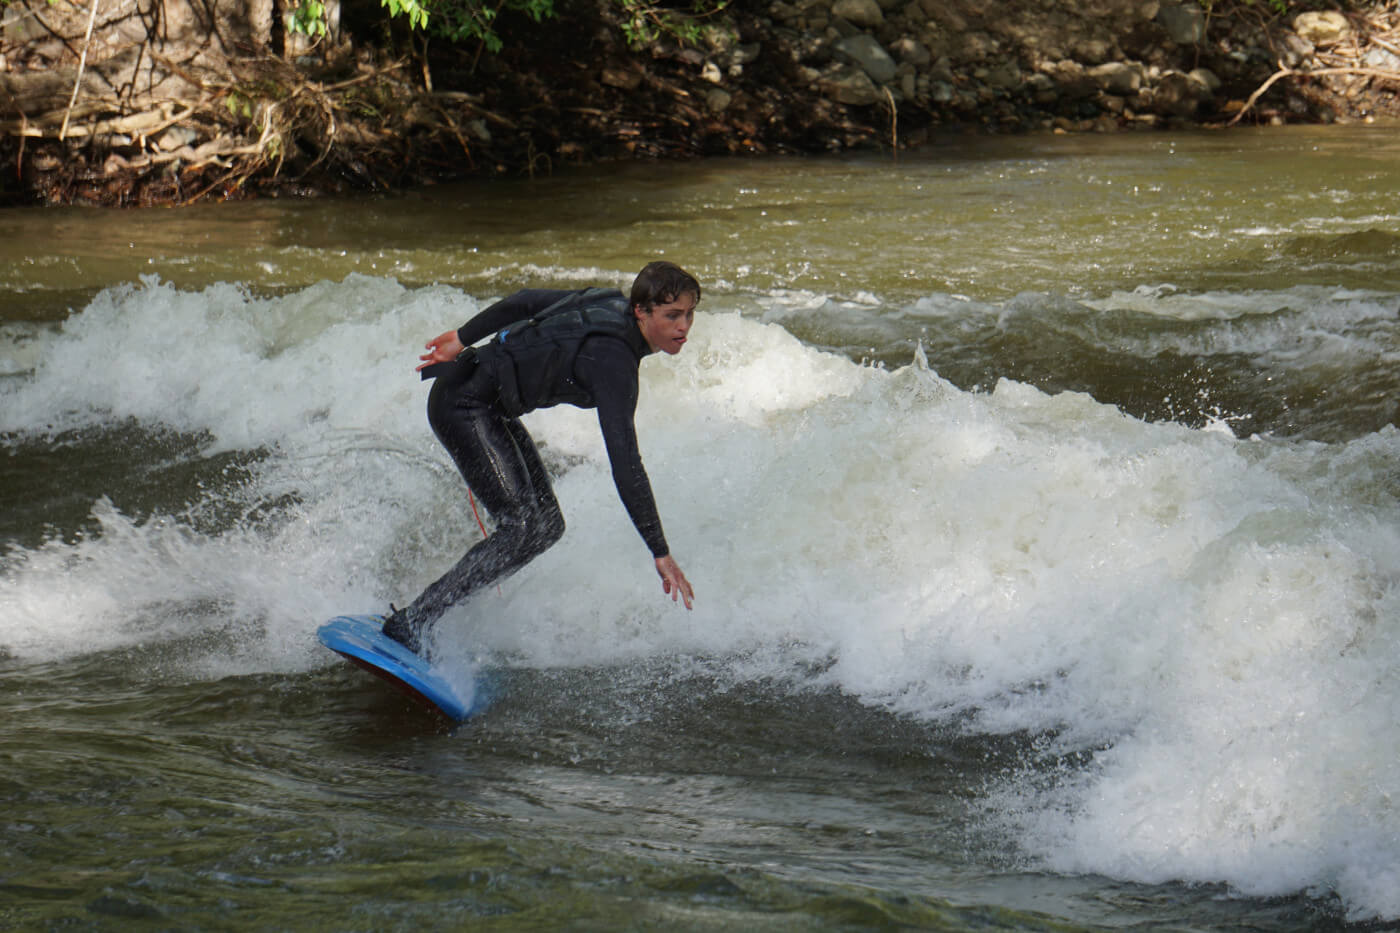 Miles Harvey surfing the original Scout Wave in Salida, CO.